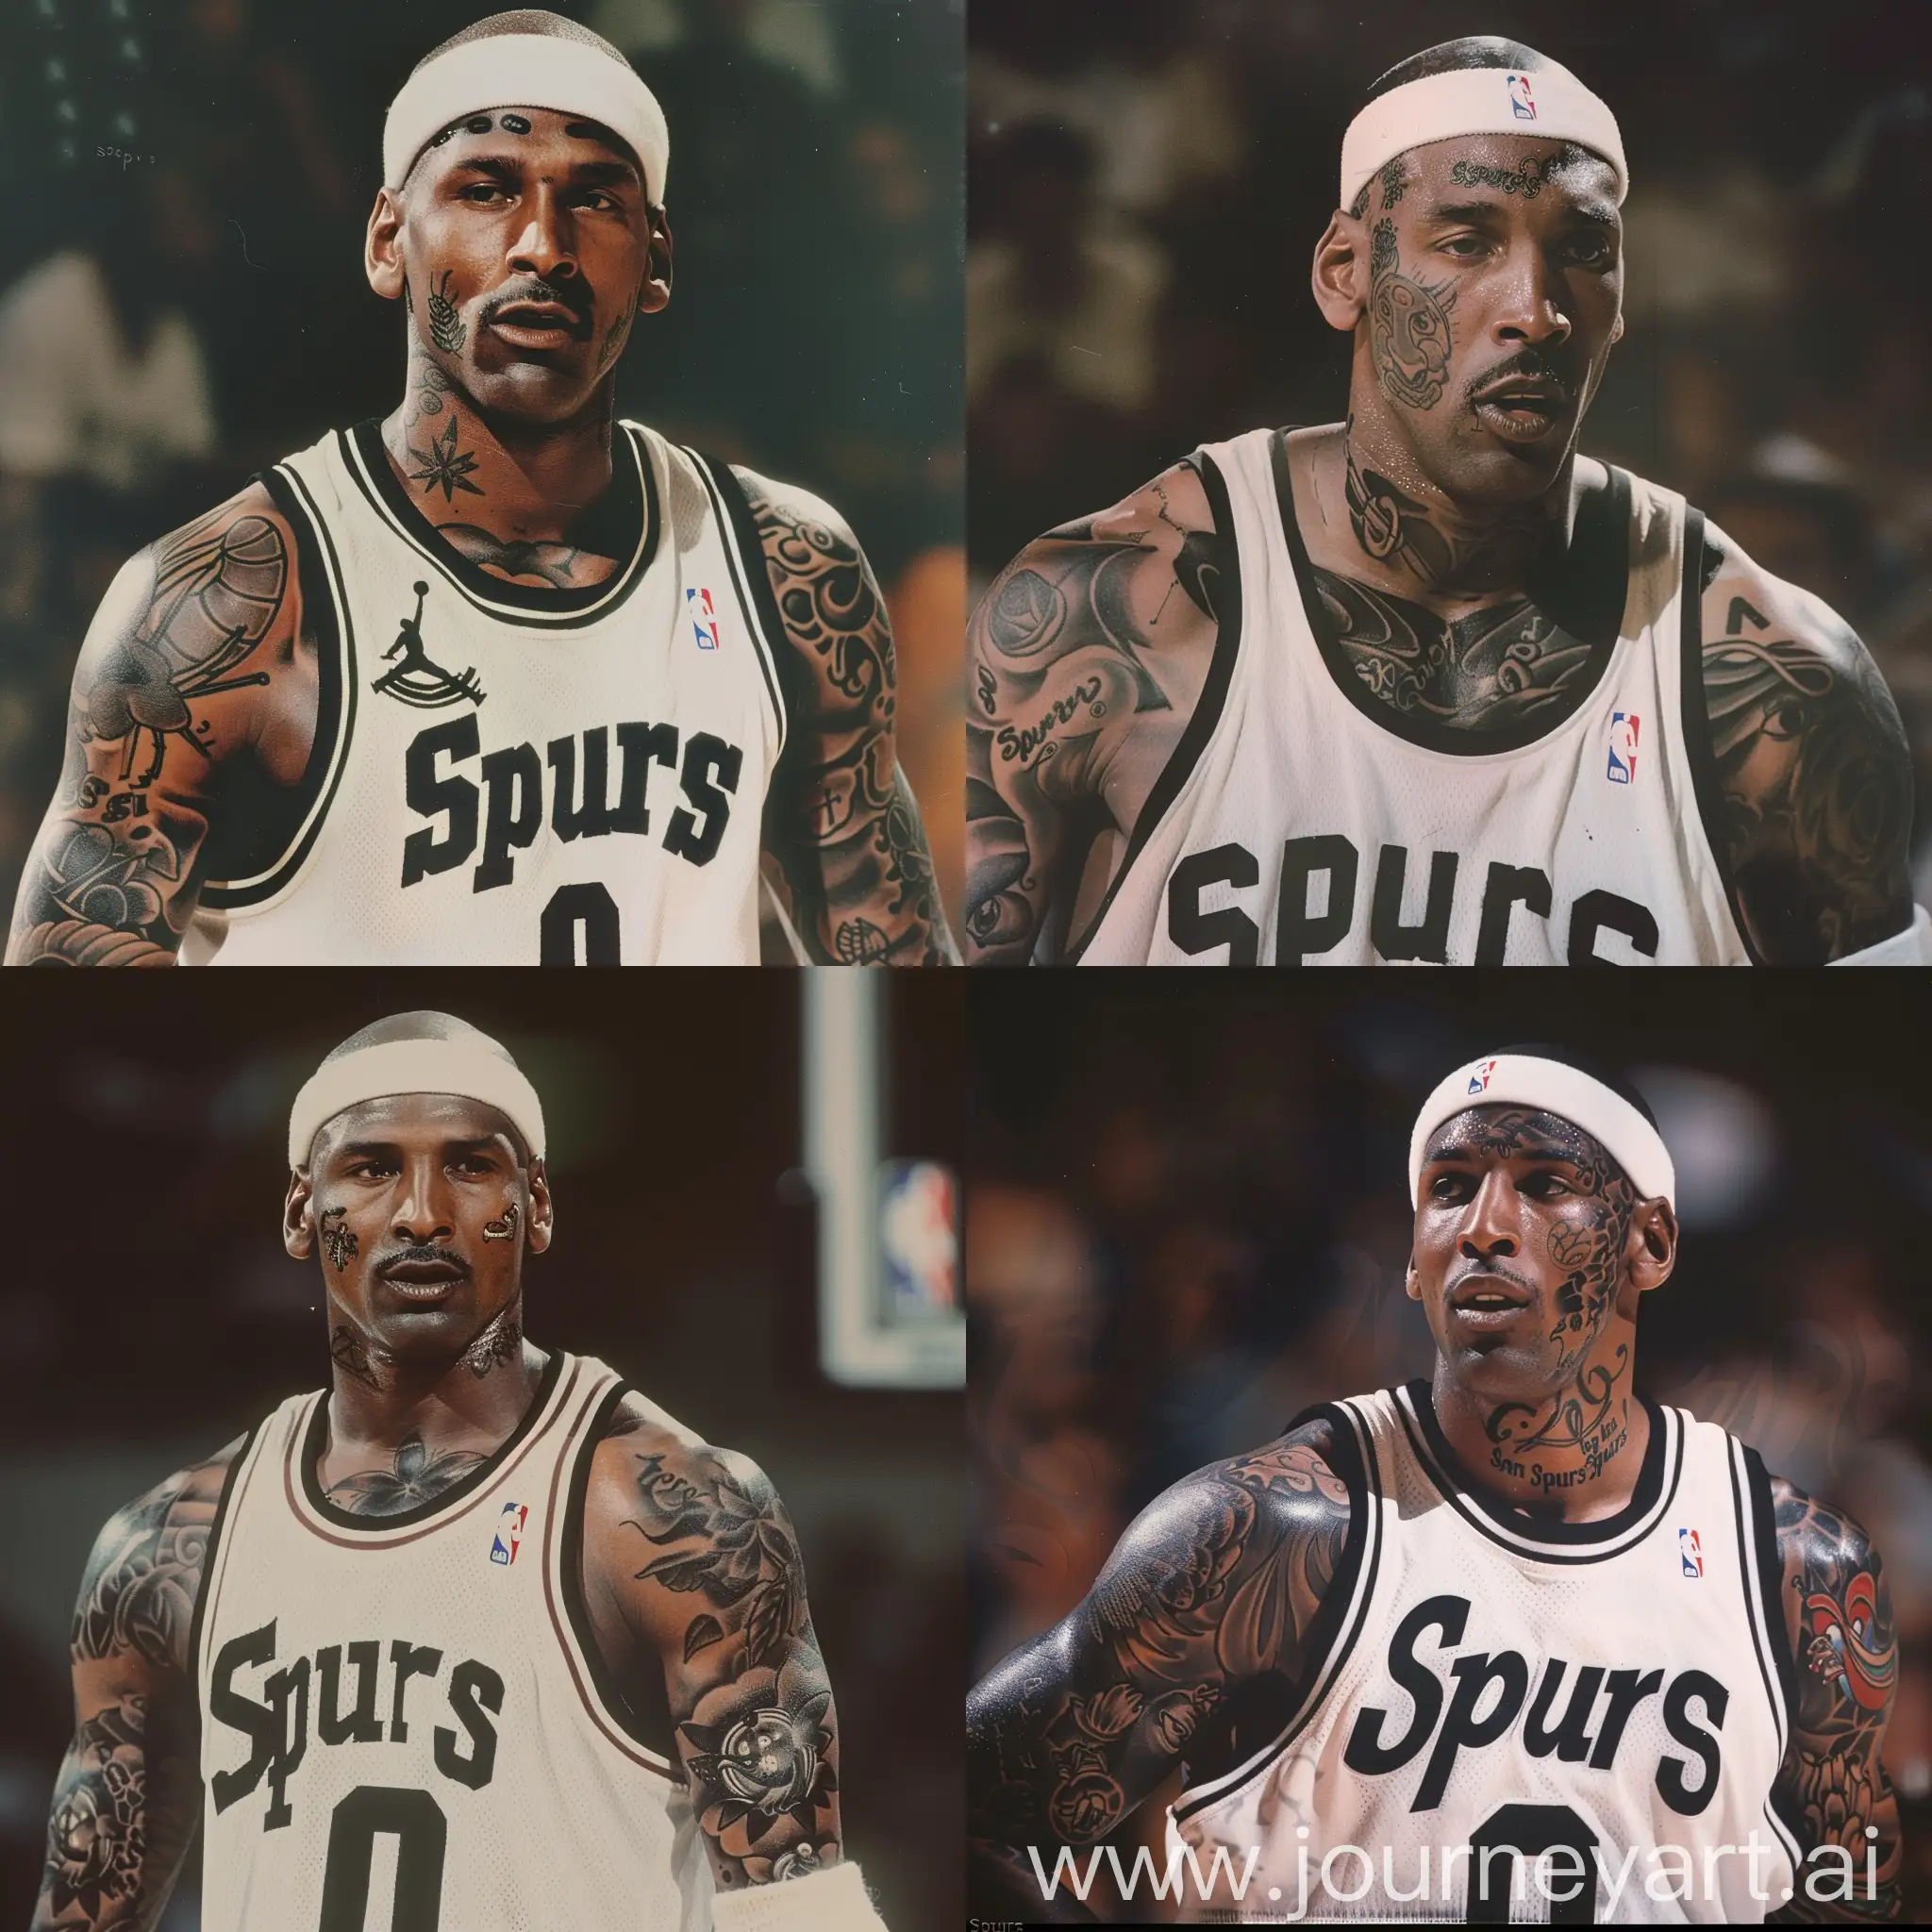 1980s-Vintage-Michael-Jordan-Interview-with-Bold-Tattoos-and-San-Antonio-Spurs-Jersey